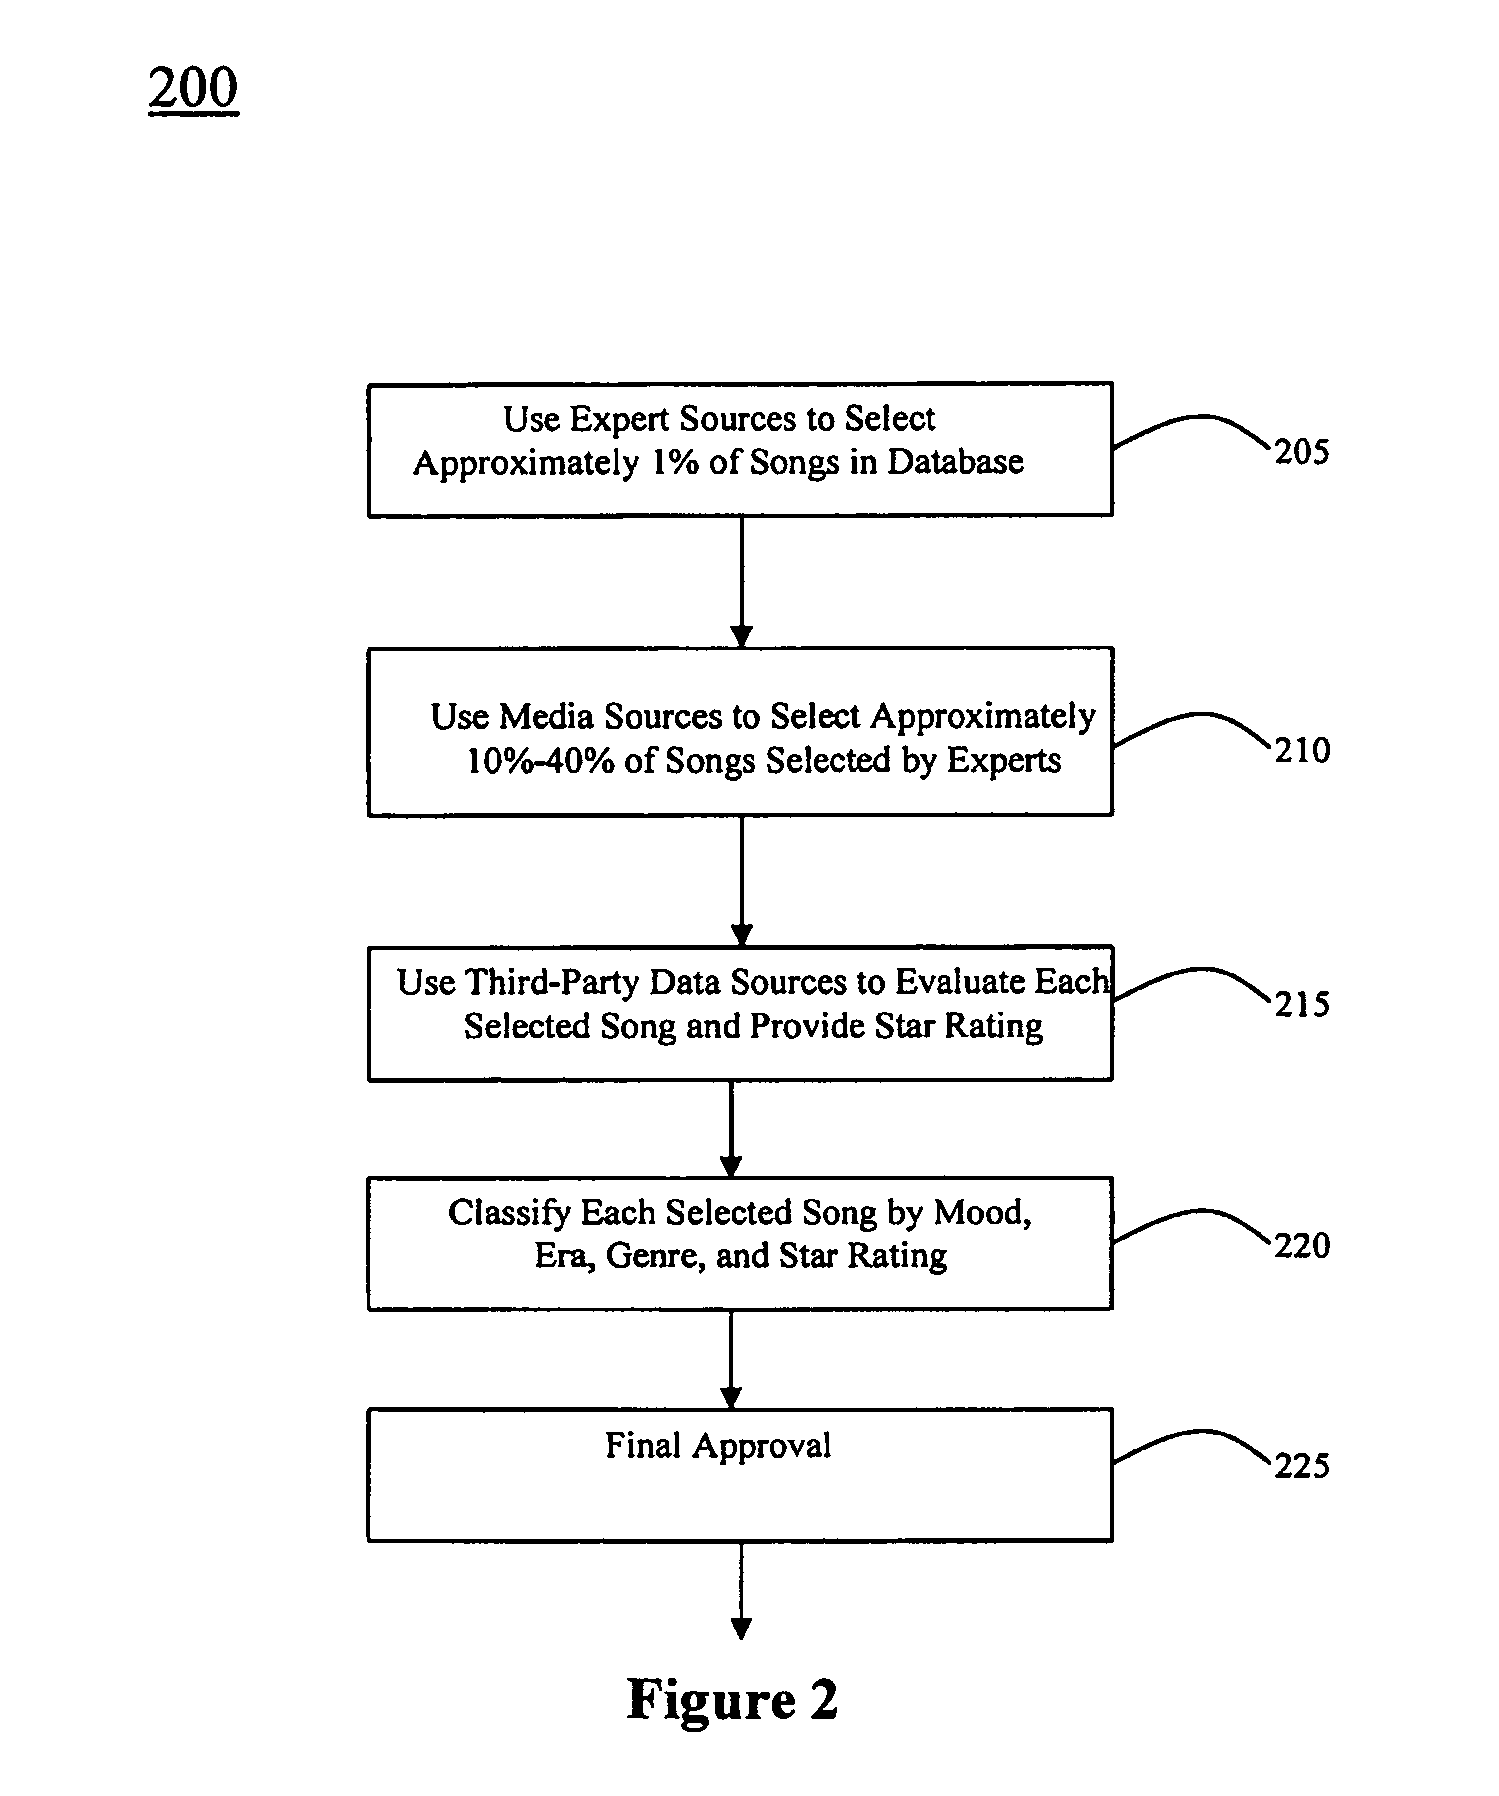 Method and apparatus for generating and updating a pre-categorized song database from which consumers may select and then download desired playlists